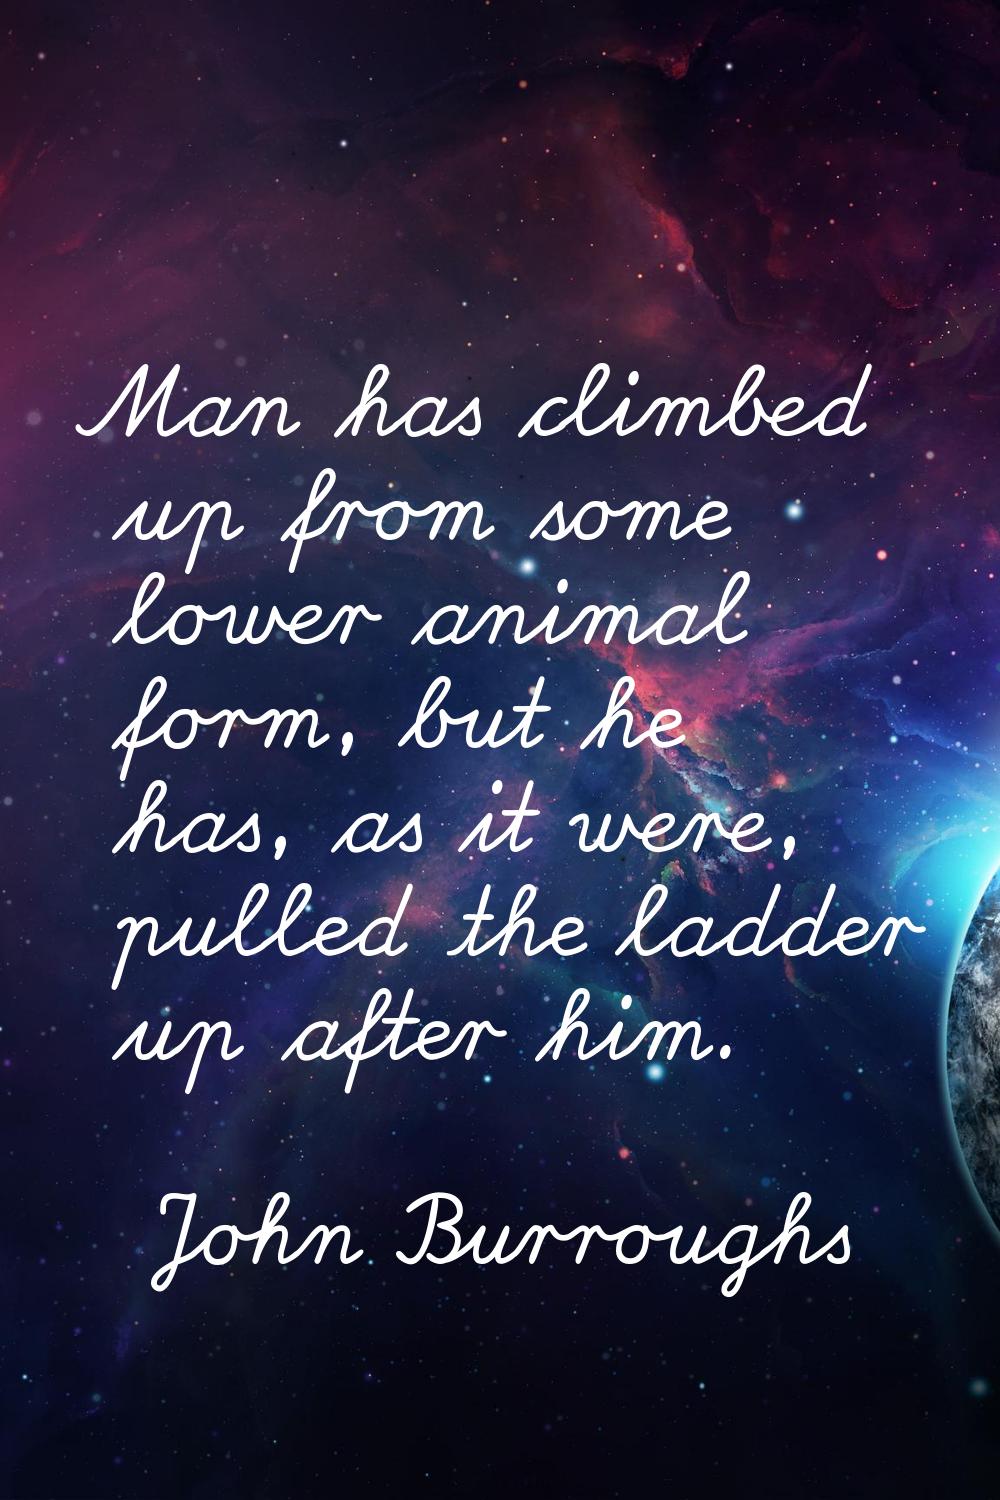 Man has climbed up from some lower animal form, but he has, as it were, pulled the ladder up after 